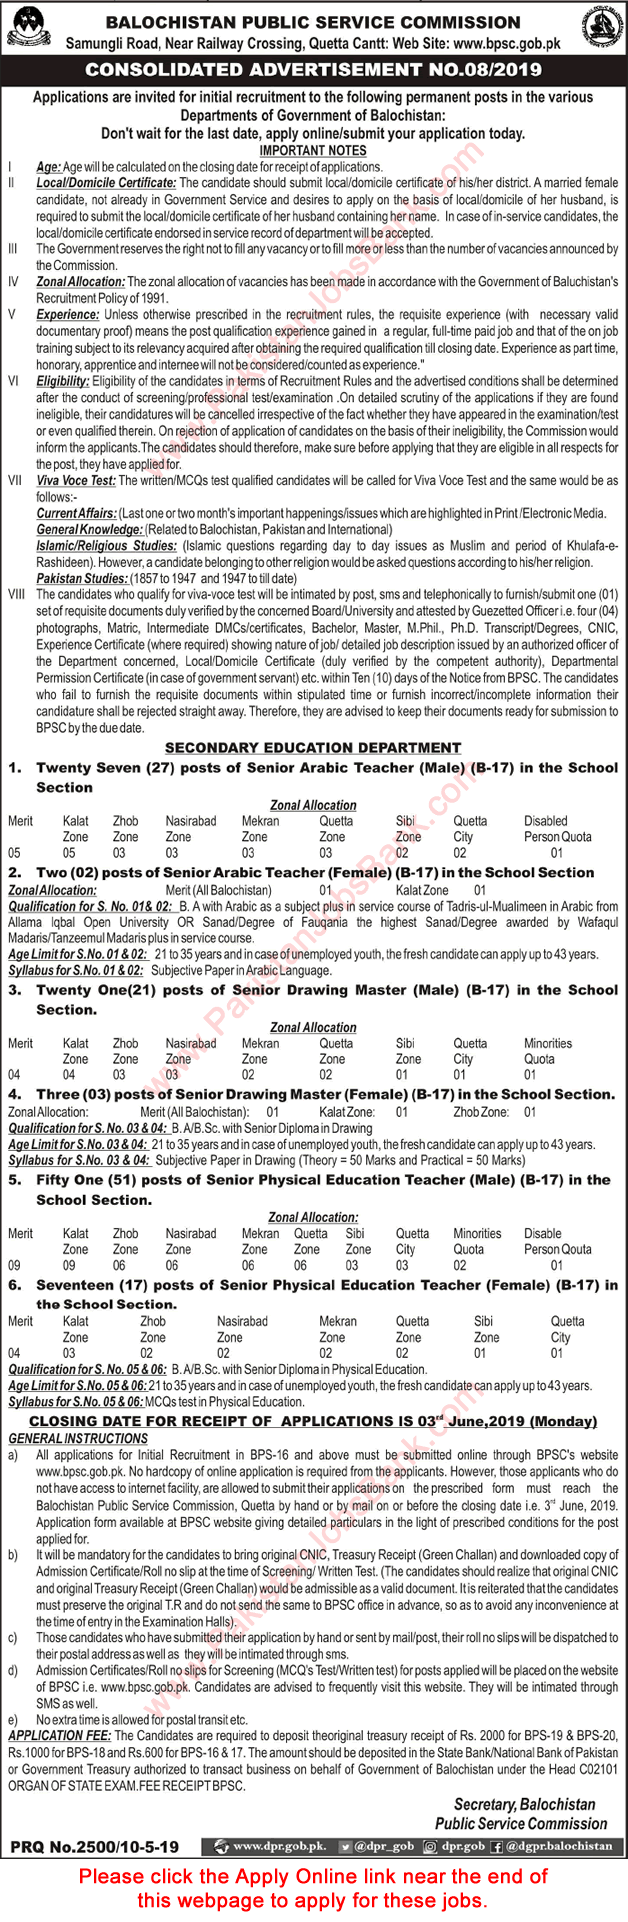 Secondary Education Department Balochistan Jobs May 2019 BPSC Online Application Form Latest